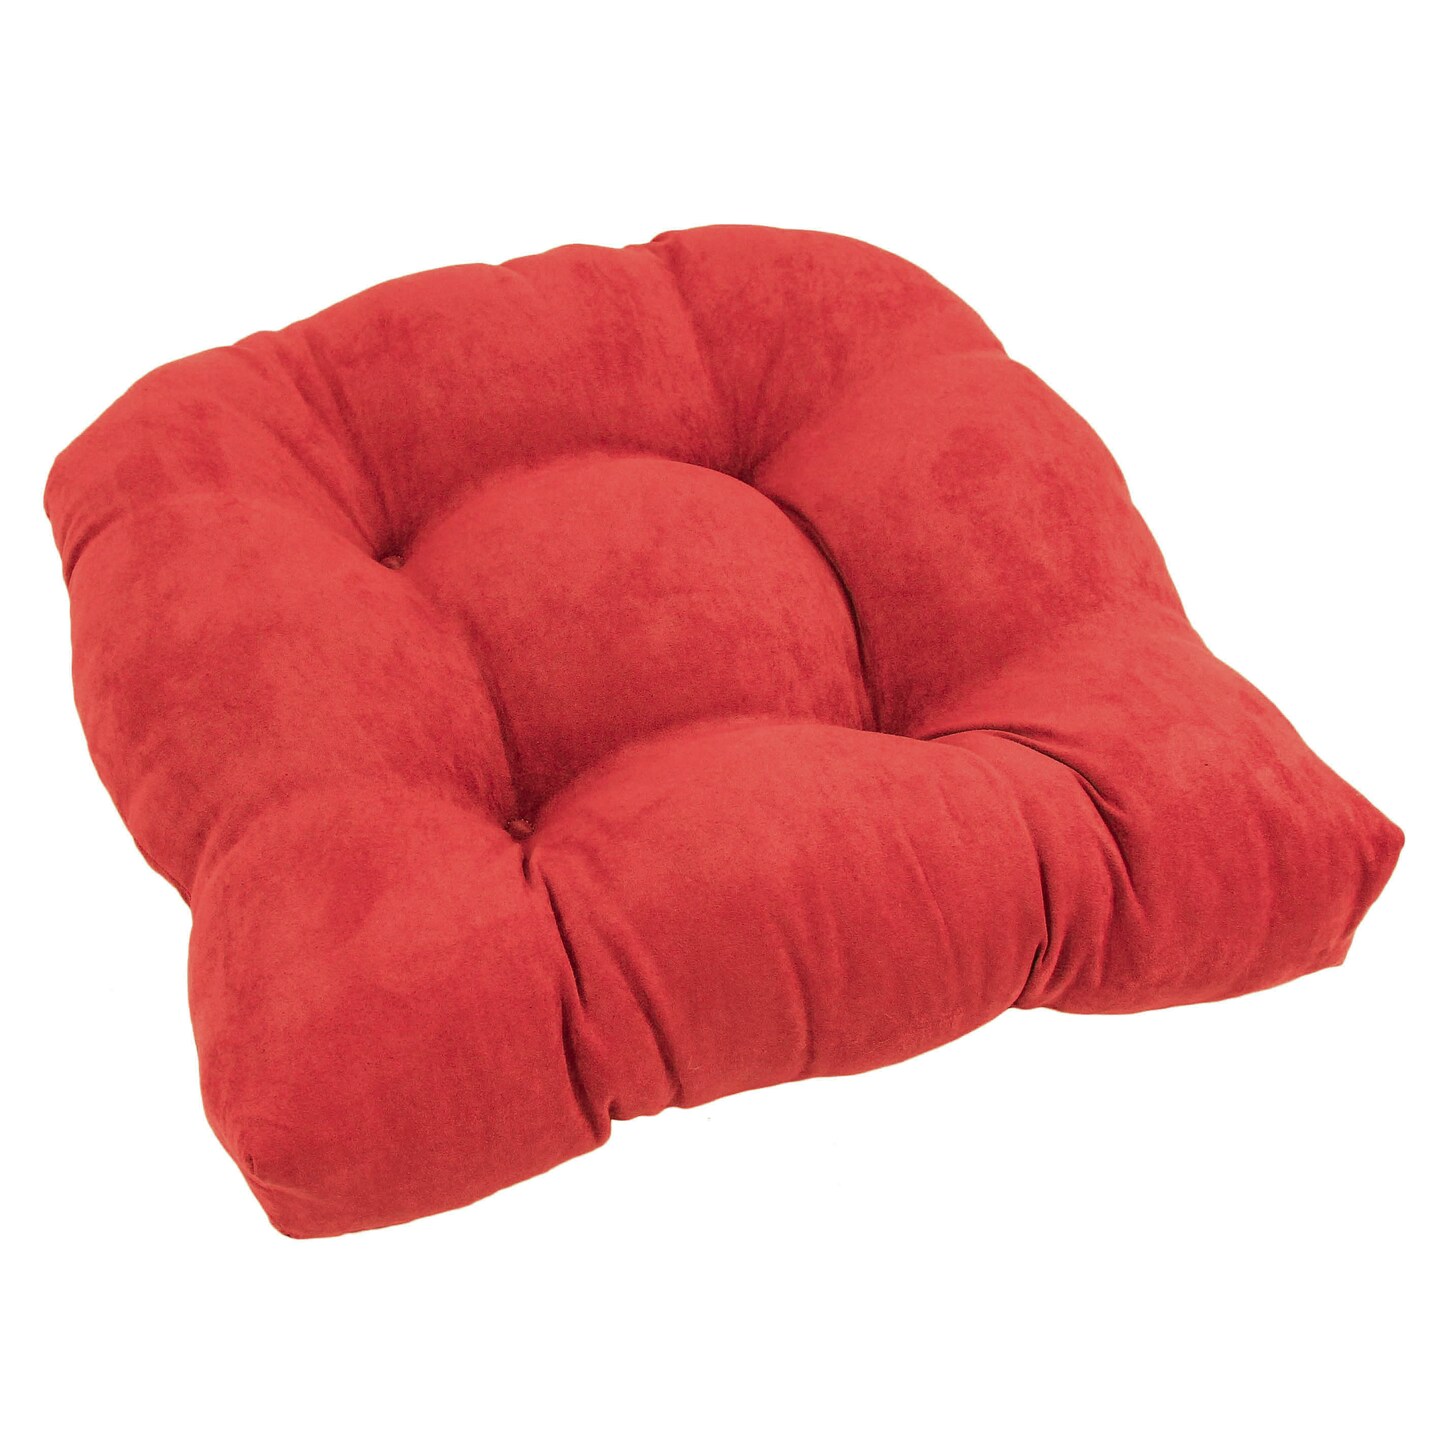 19-inch U-Shaped Micro Suede Tufted Dining Chair Cushion - Cardinal Red